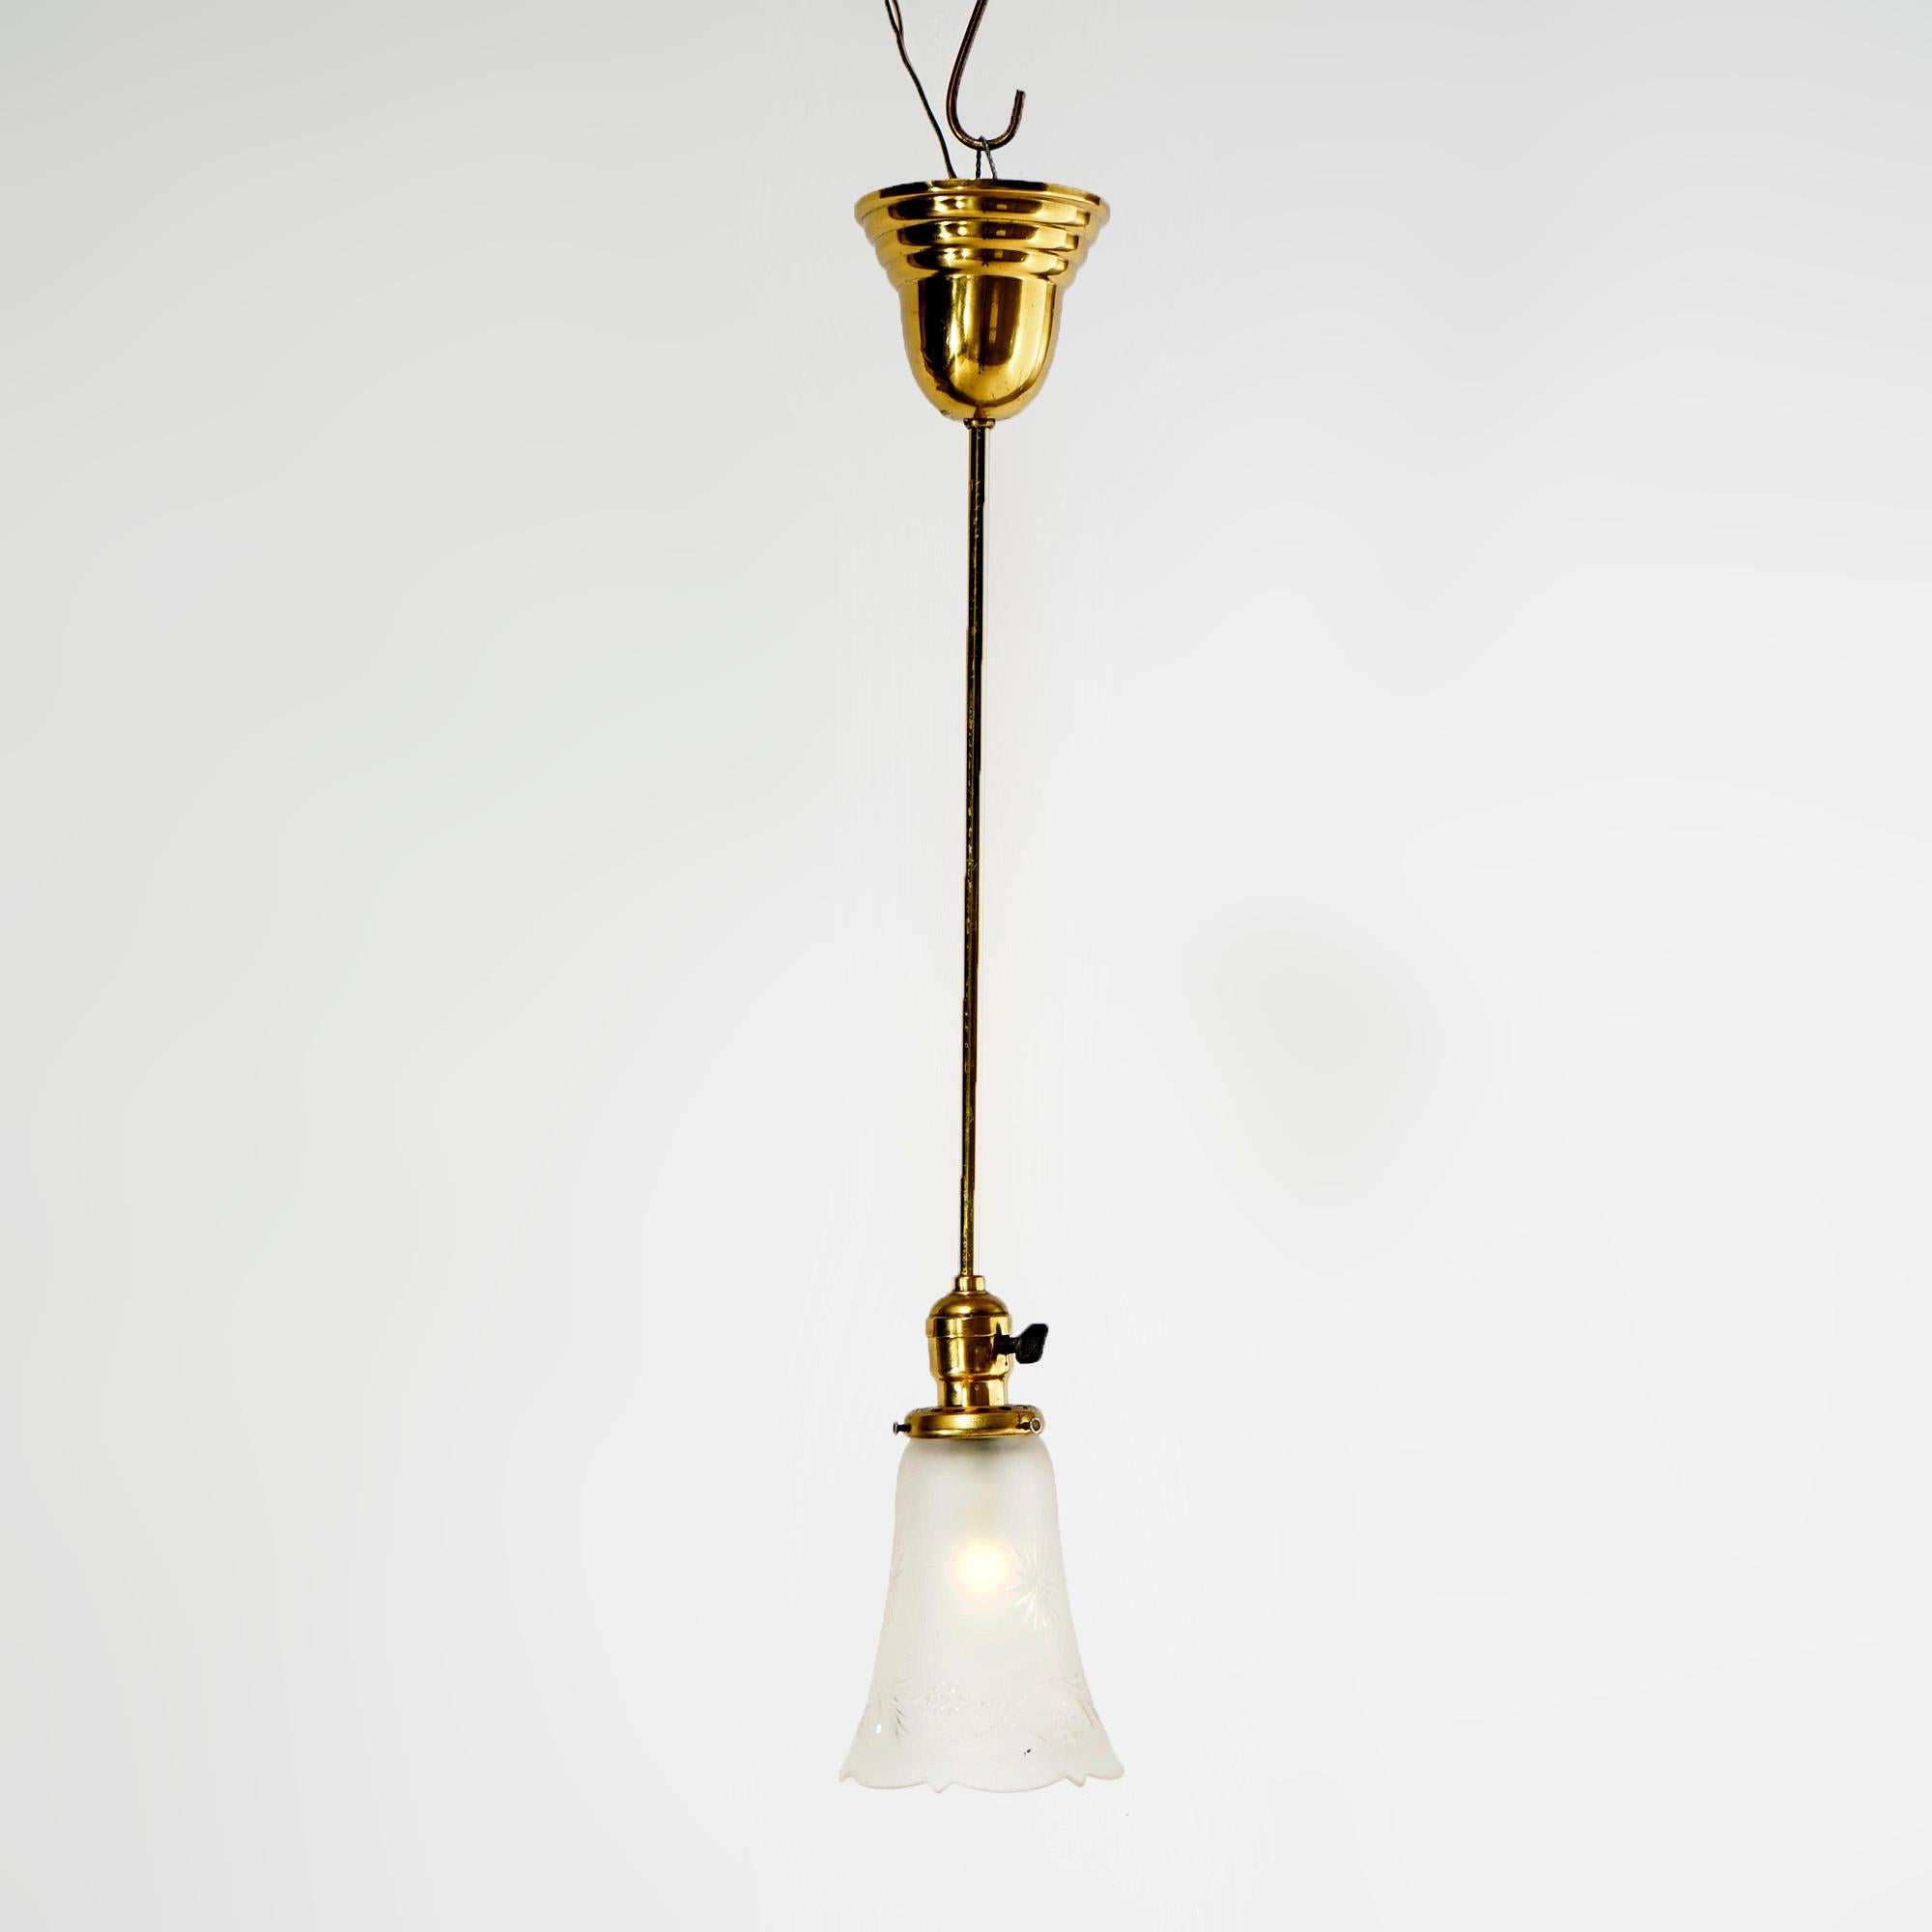 American Antique Brass Hanging Hall Light Fixture Circa 1920 For Sale